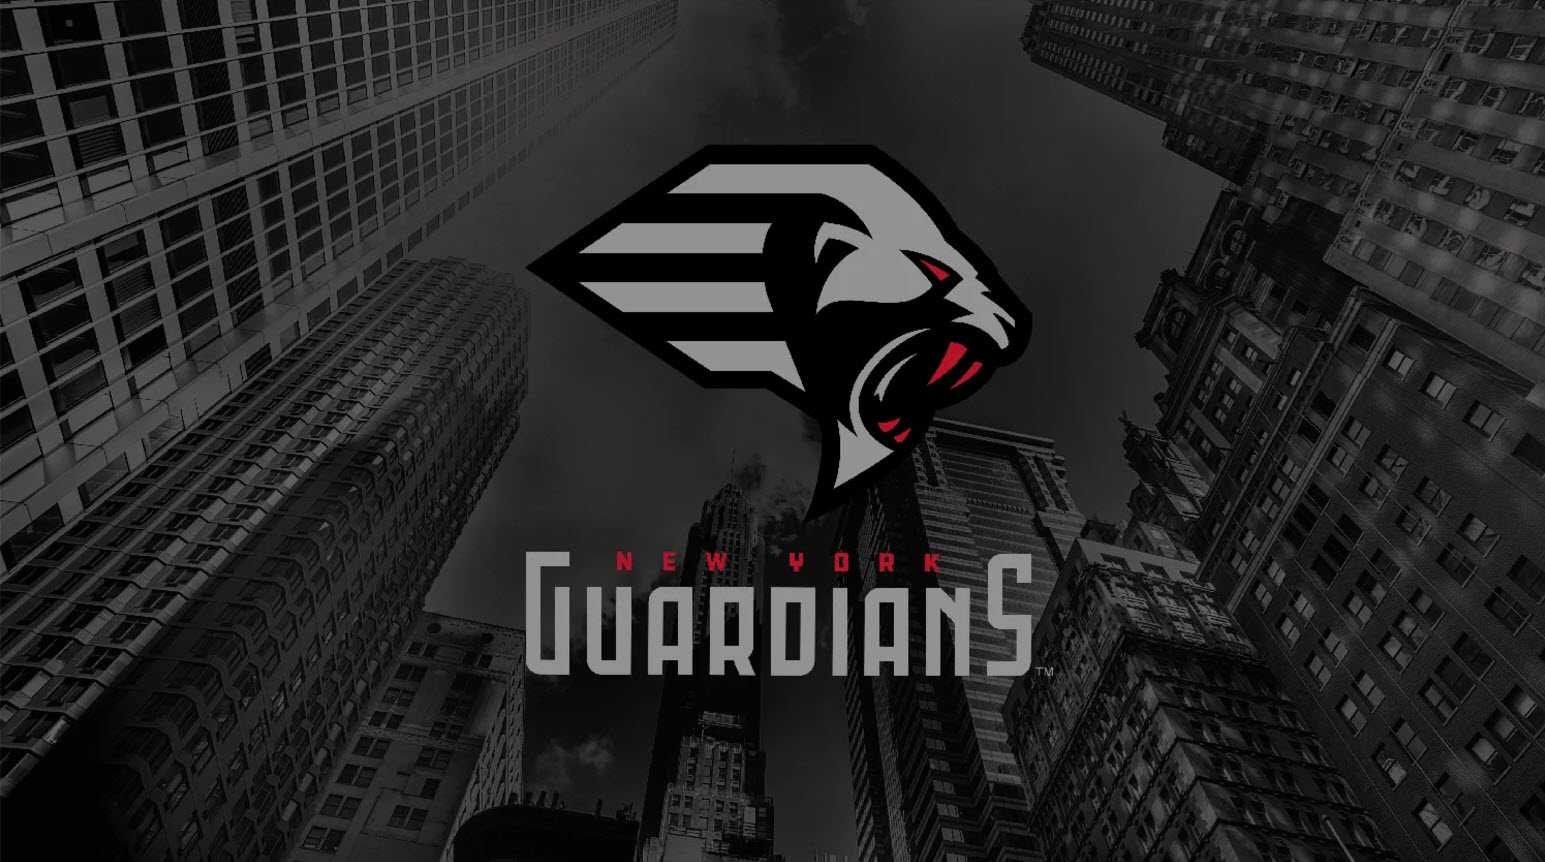  Reporting for Duty: Guardians Shut Out by Defenders in XFL Week Two